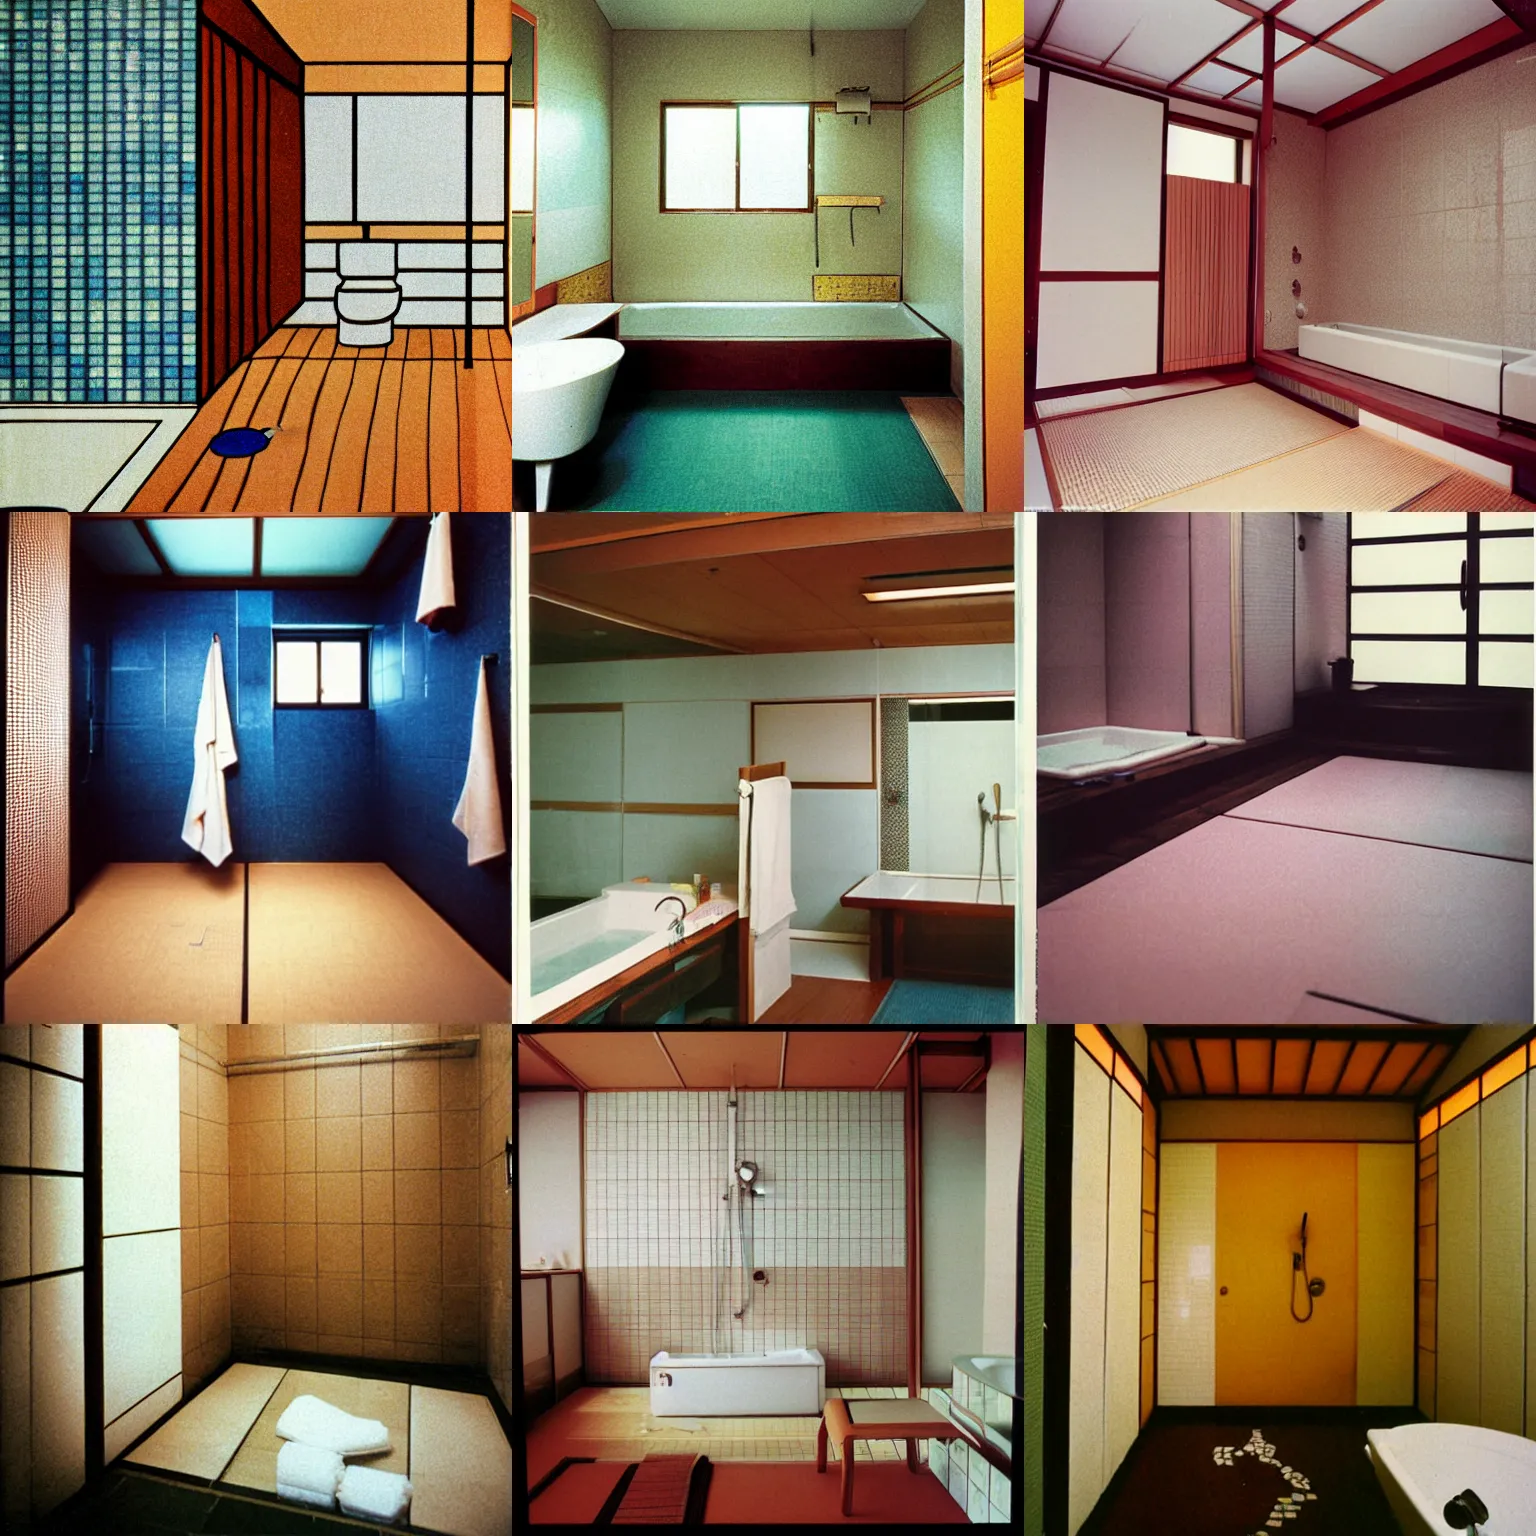 Prompt: a long - shot, color home photograph portrait of a japanese bathroom, floor, ceiling, day lighting, 1 9 9 0 photo from photograph magazine.